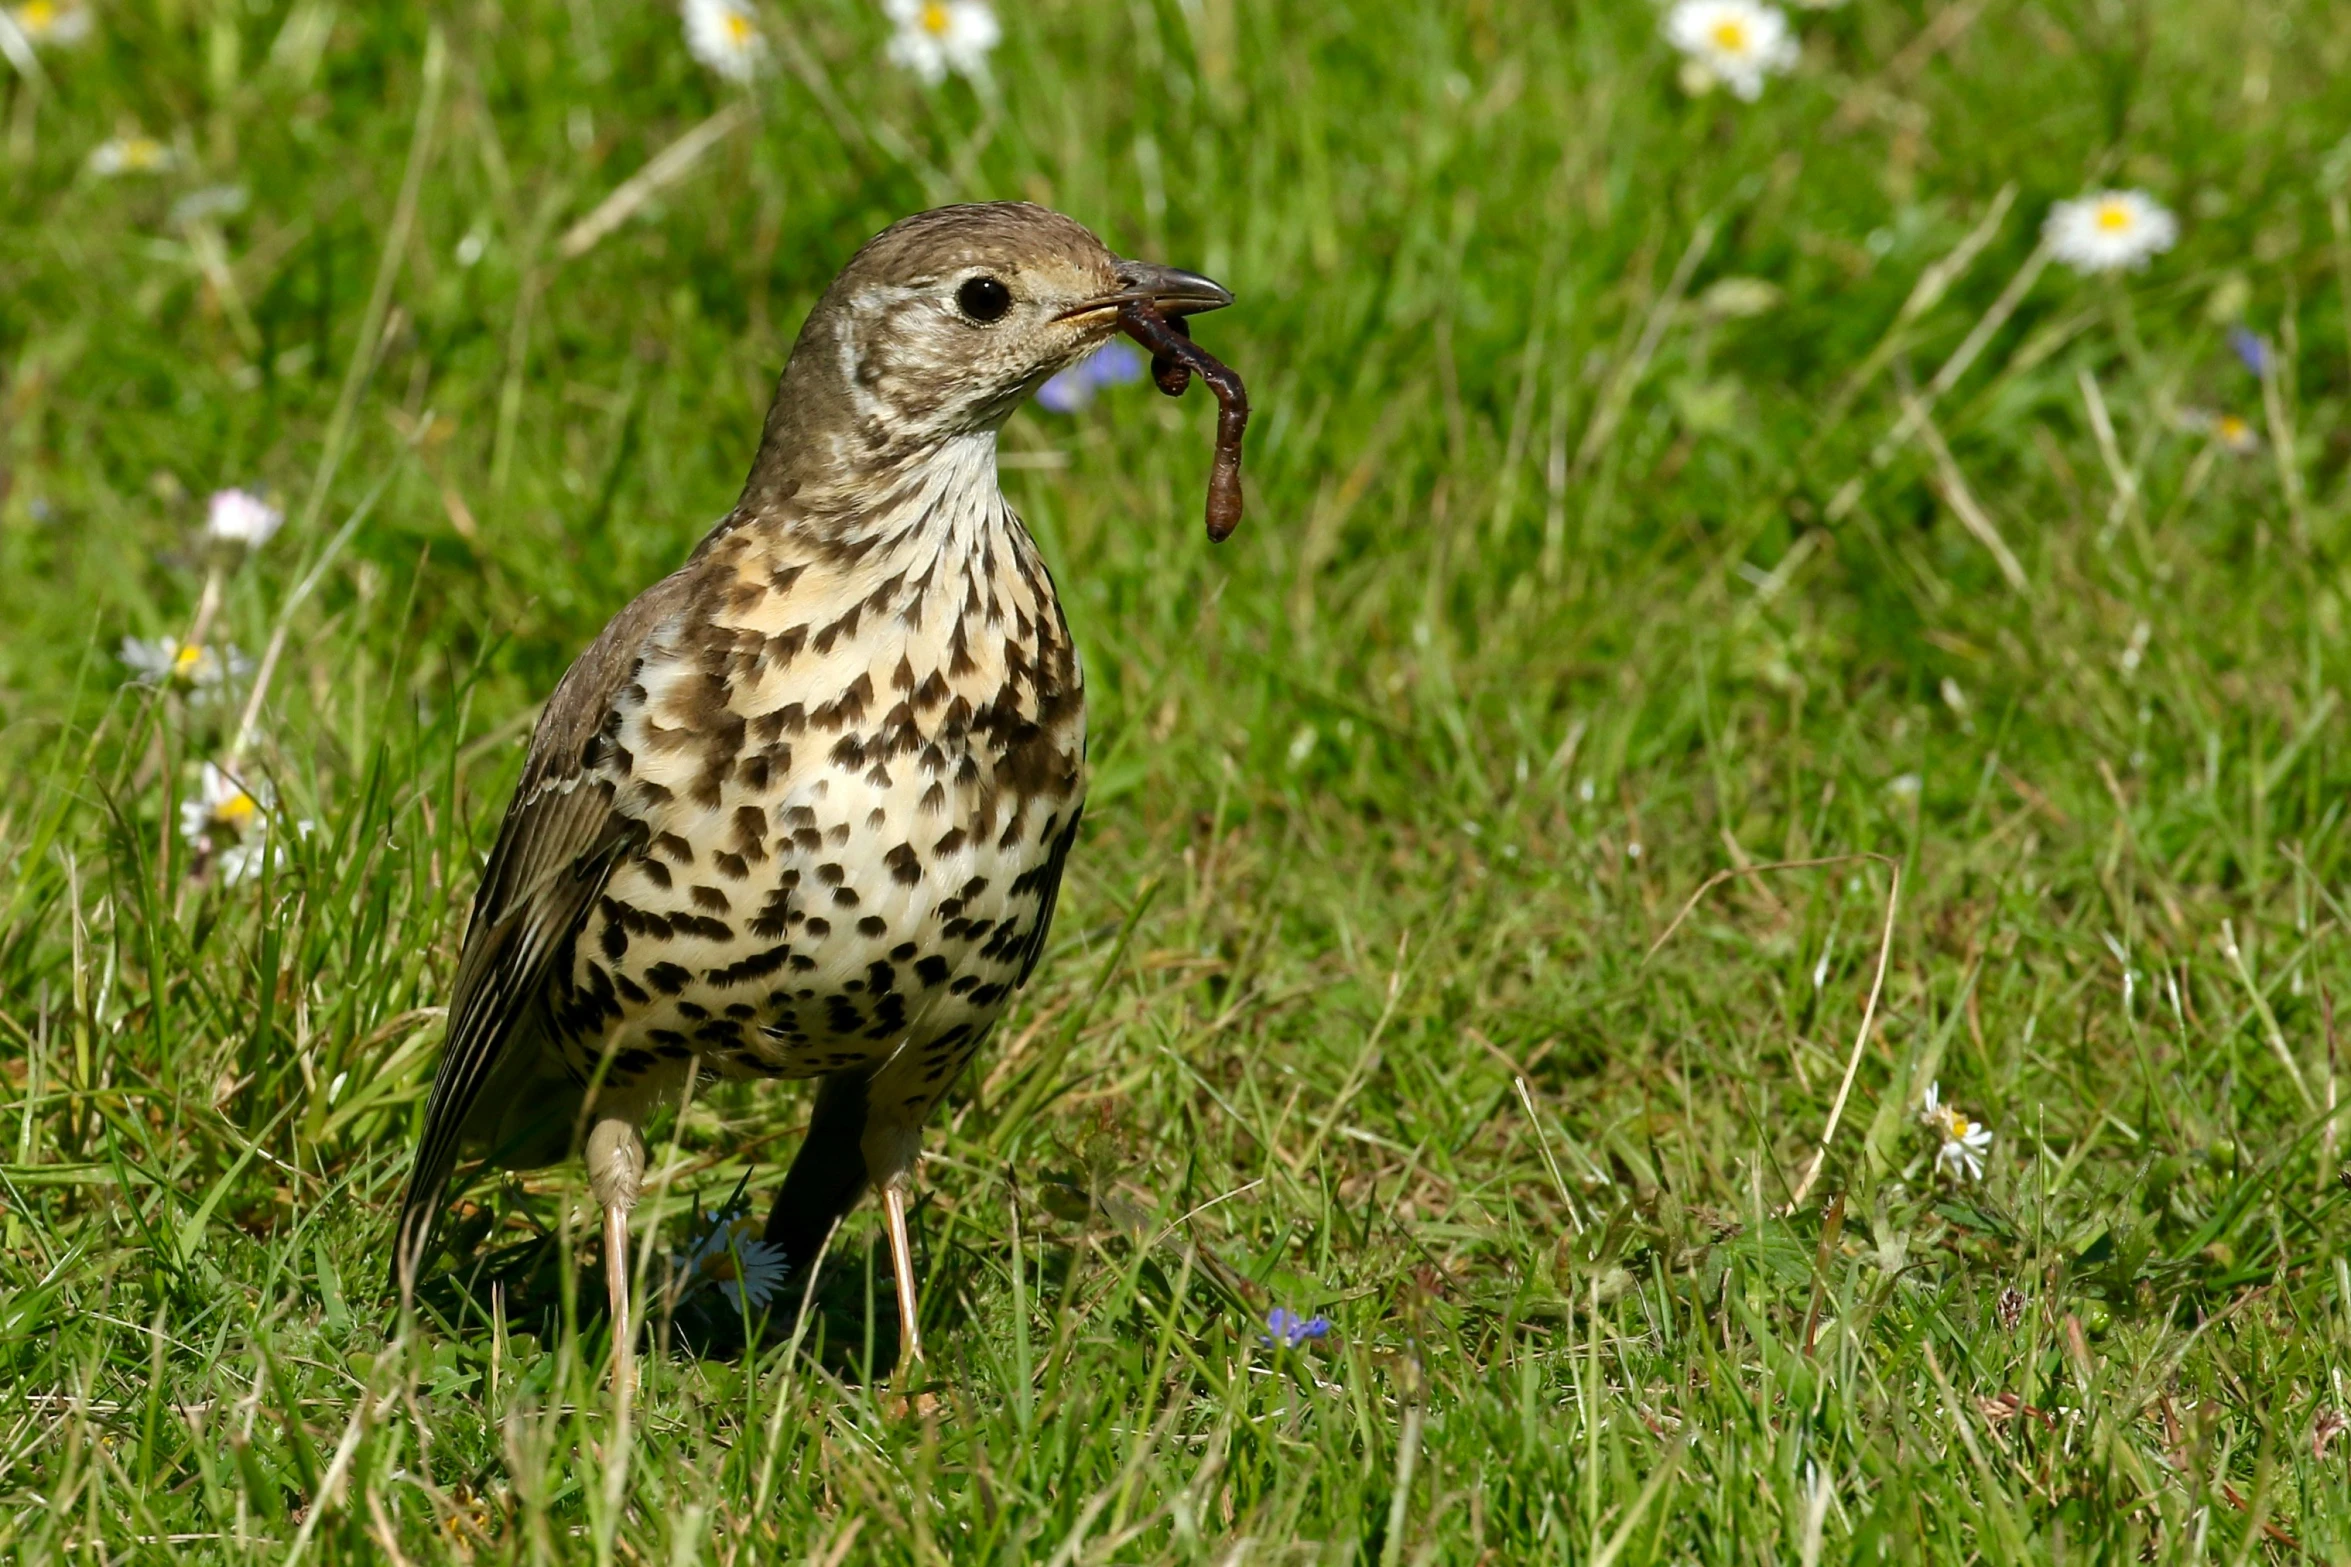 a bird on some grass with a stick in its mouth